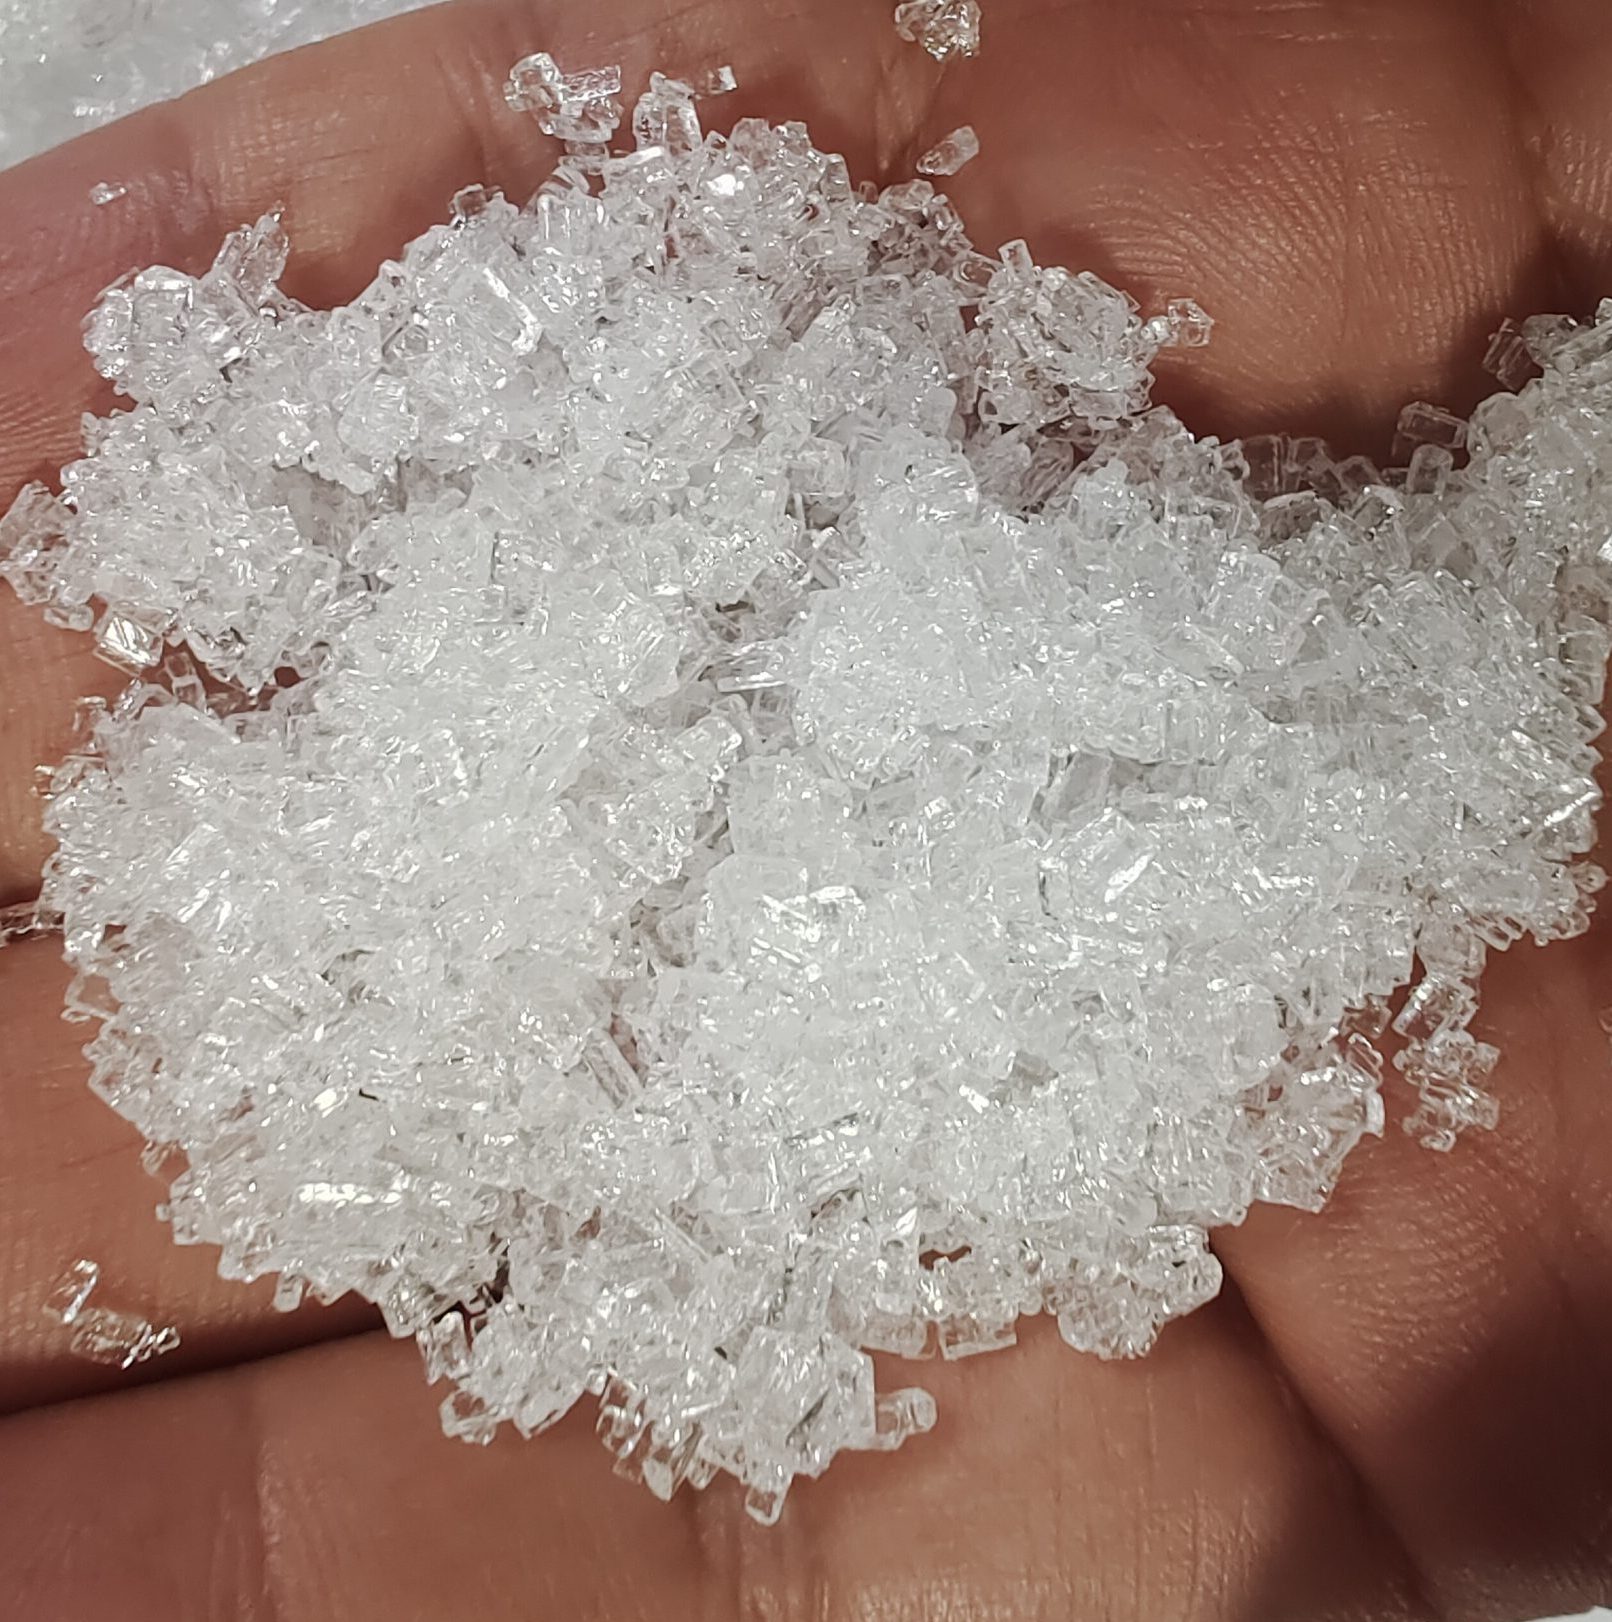 Sodium thiosulfate can be used for tanning leather and dechlorination agent